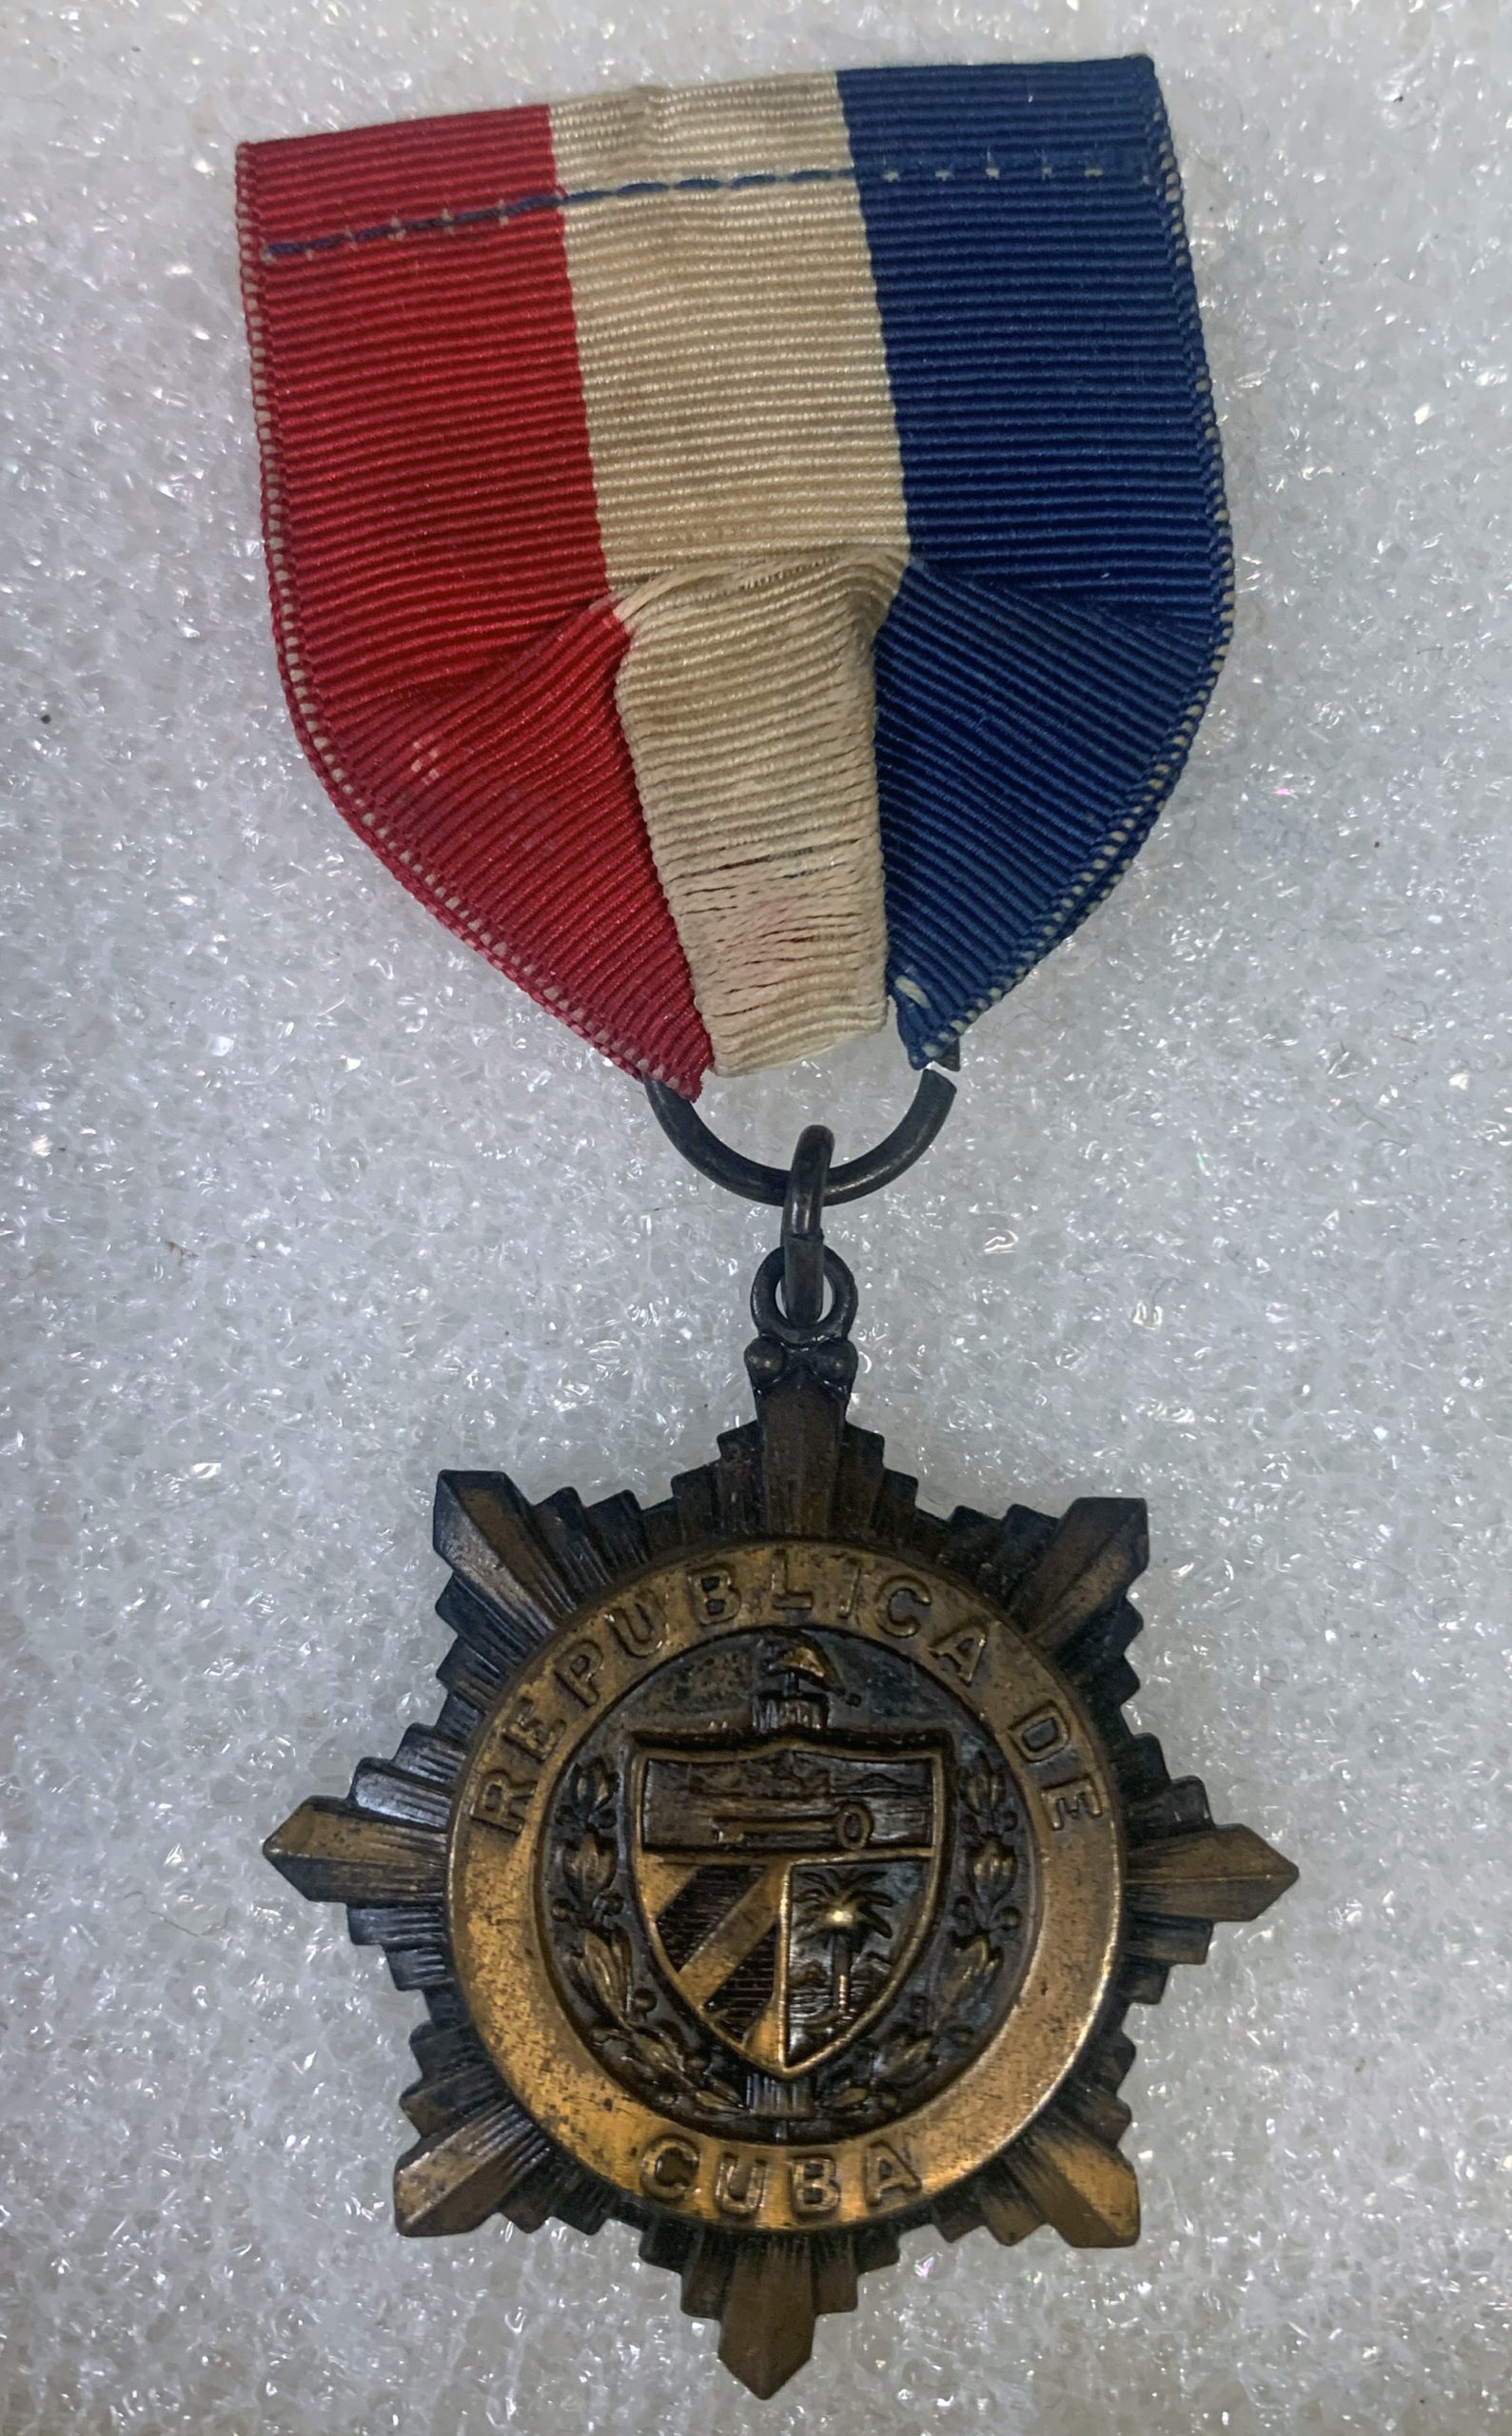 Medal, Army of Occupation-Cuba, issued to contract nurse Rose M. Heavren for her services at the US General Hospital, Santiago, Cuba.<br />
Rose M. Heavren Collection, Gift of Mary H. Budds, Military Women’s Memorial Collection